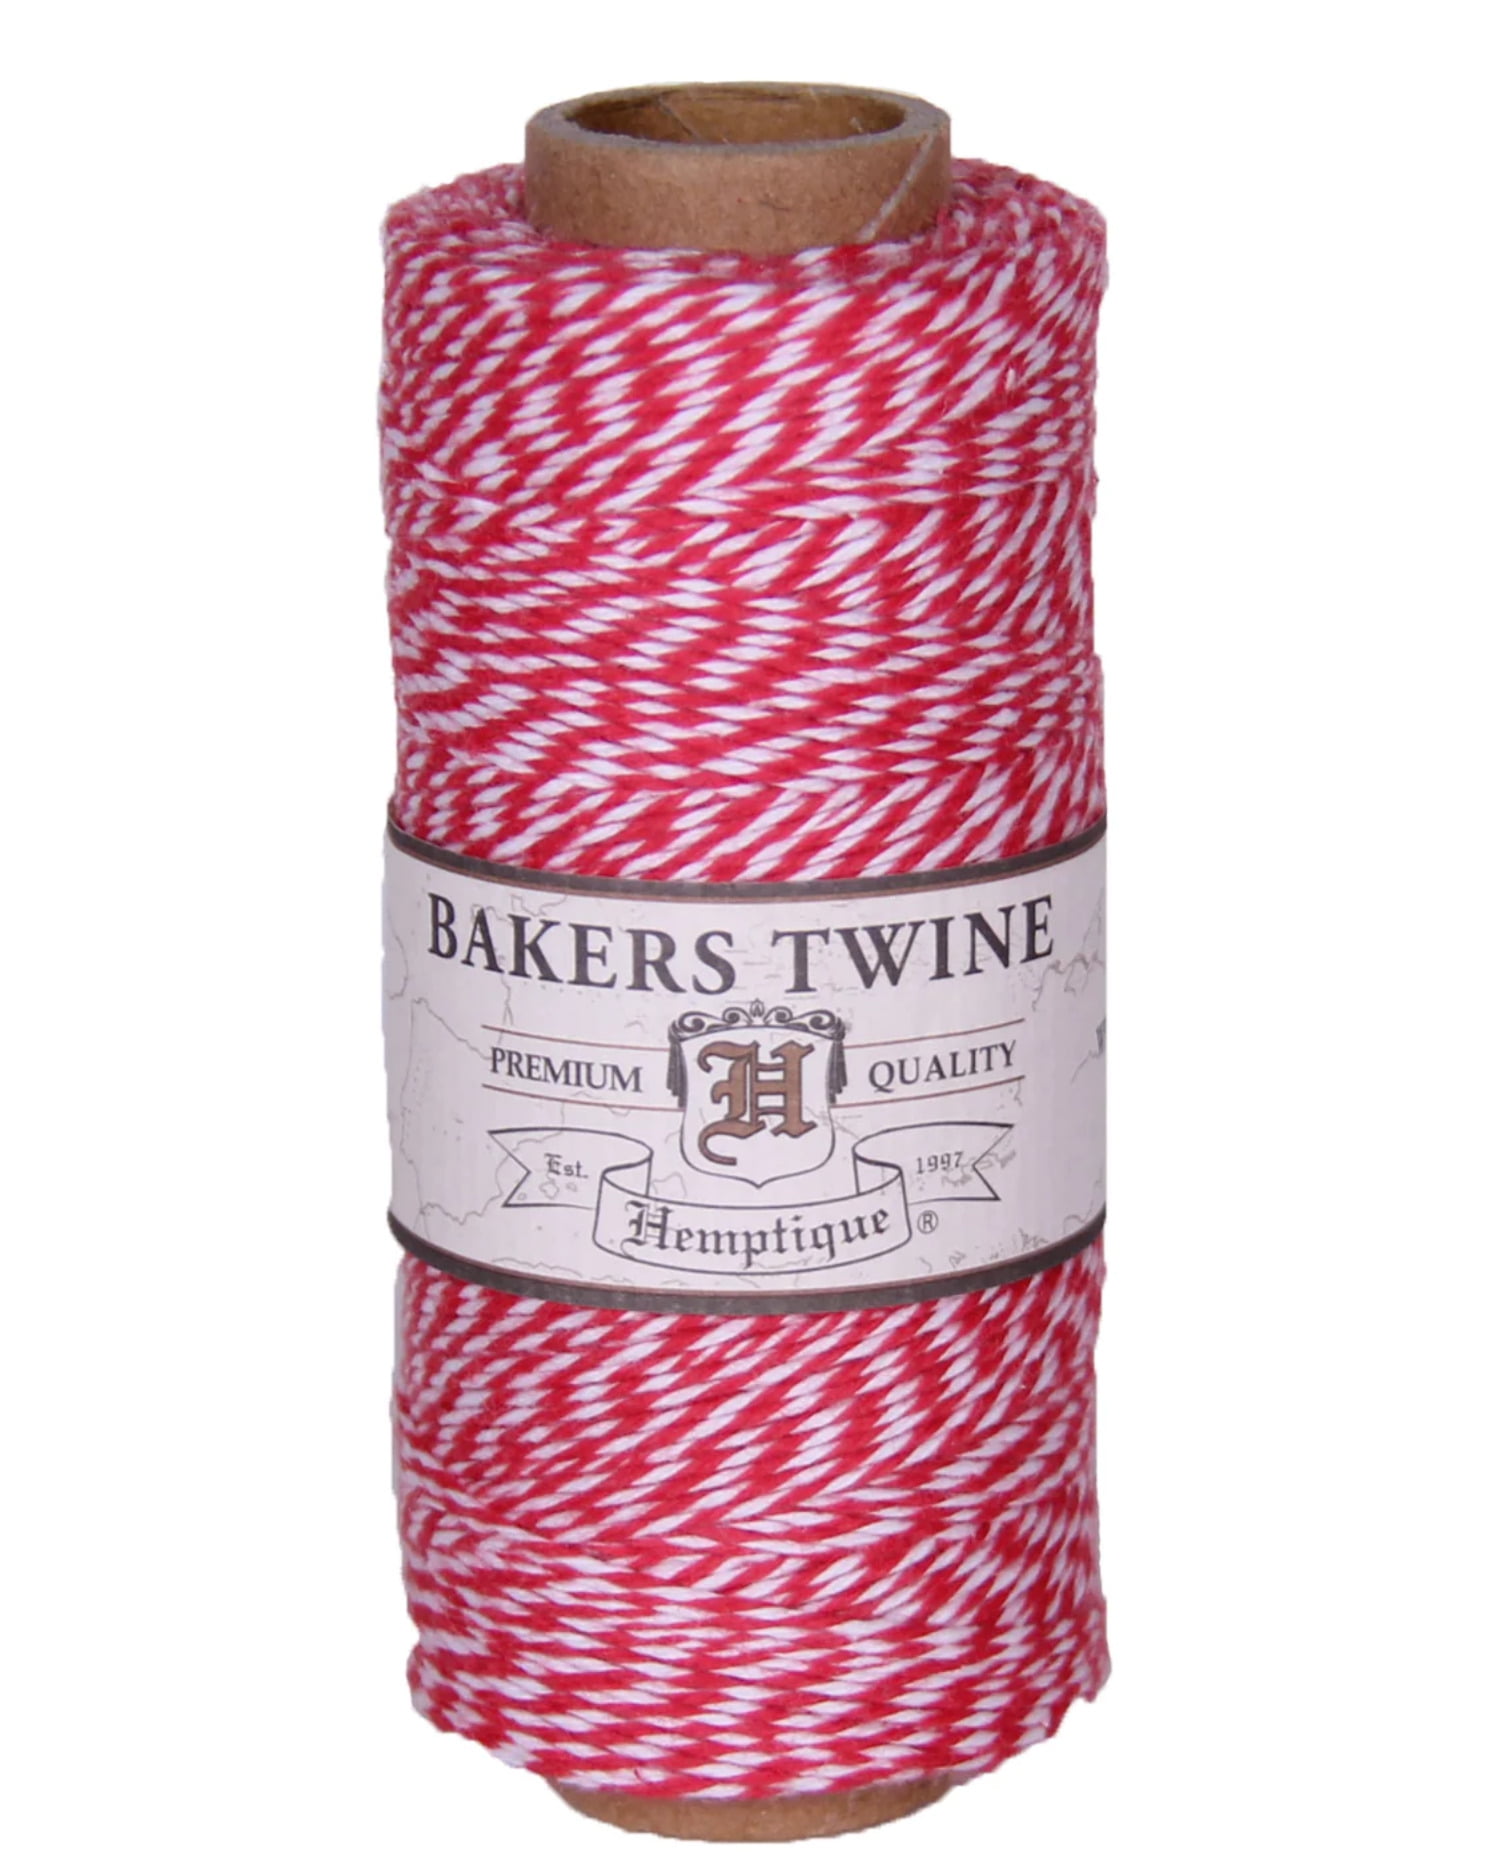 10mts Cotton Bakers Twine. Choice of colour Red/Black/White. Multi